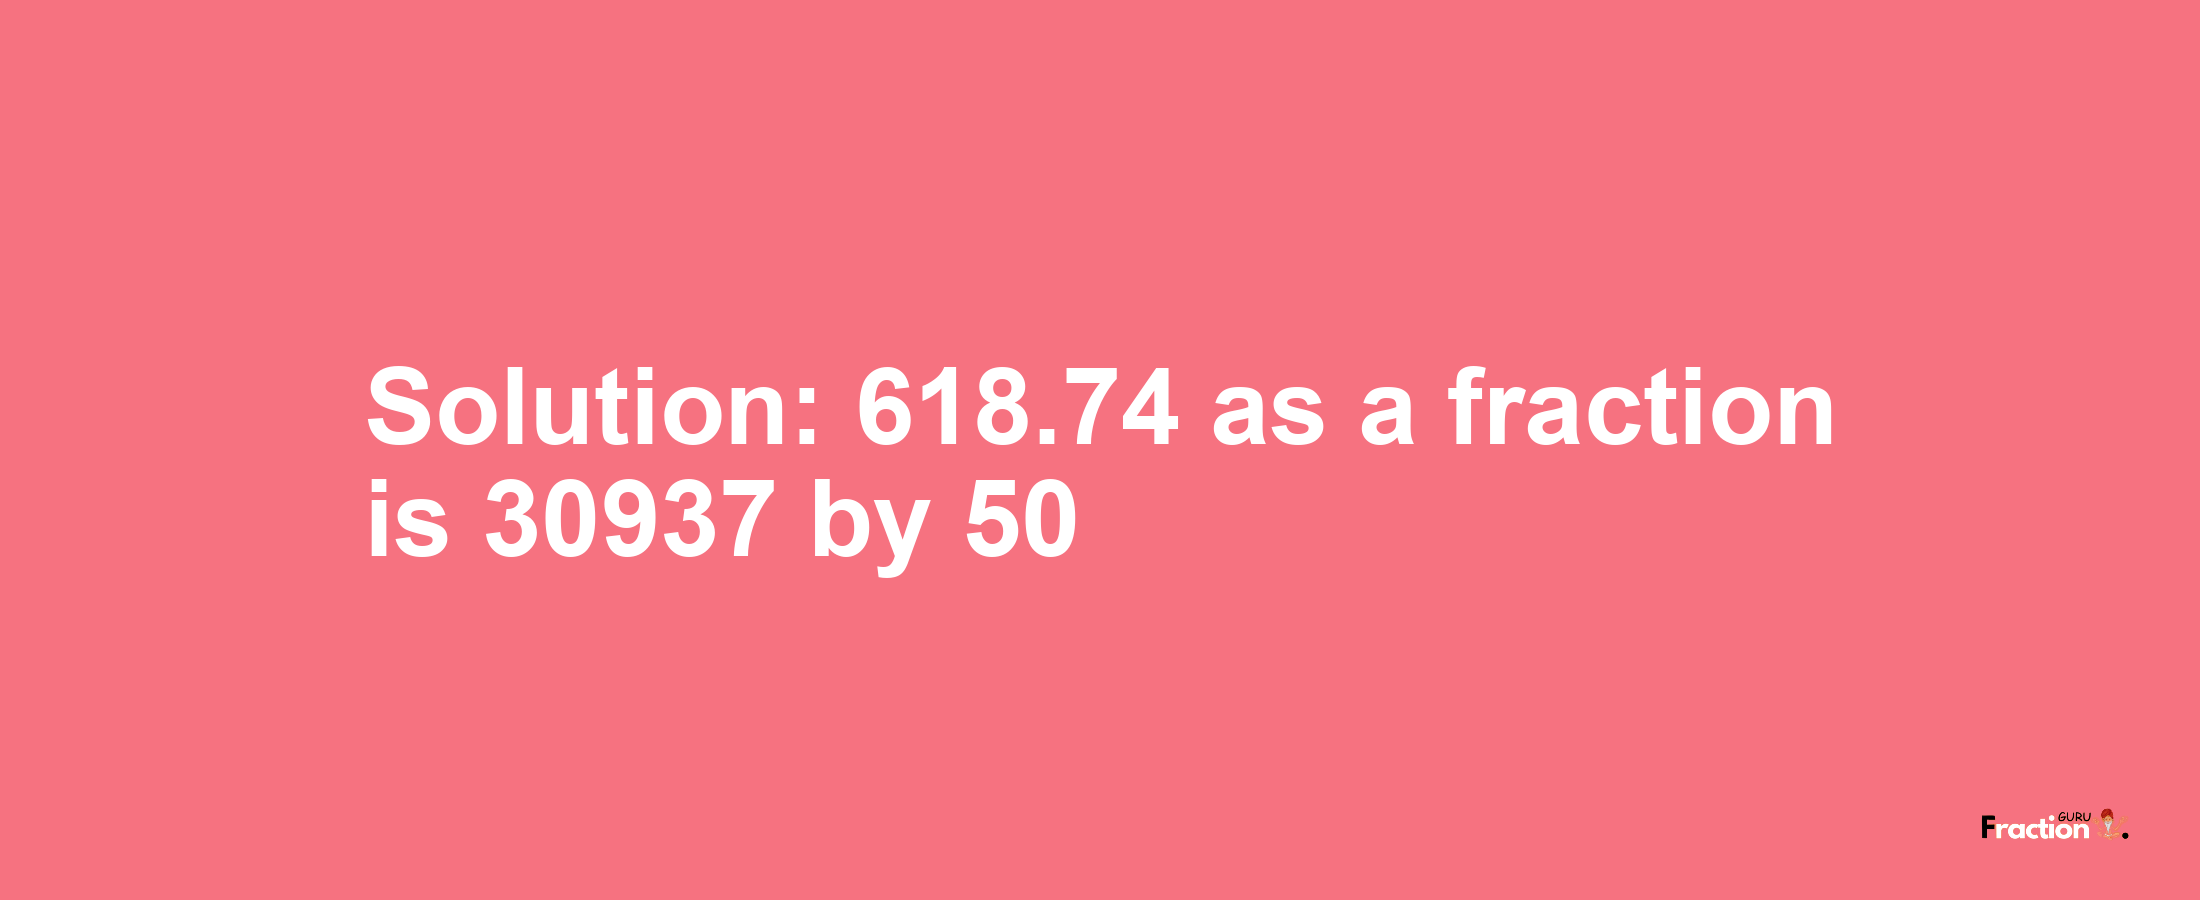 Solution:618.74 as a fraction is 30937/50